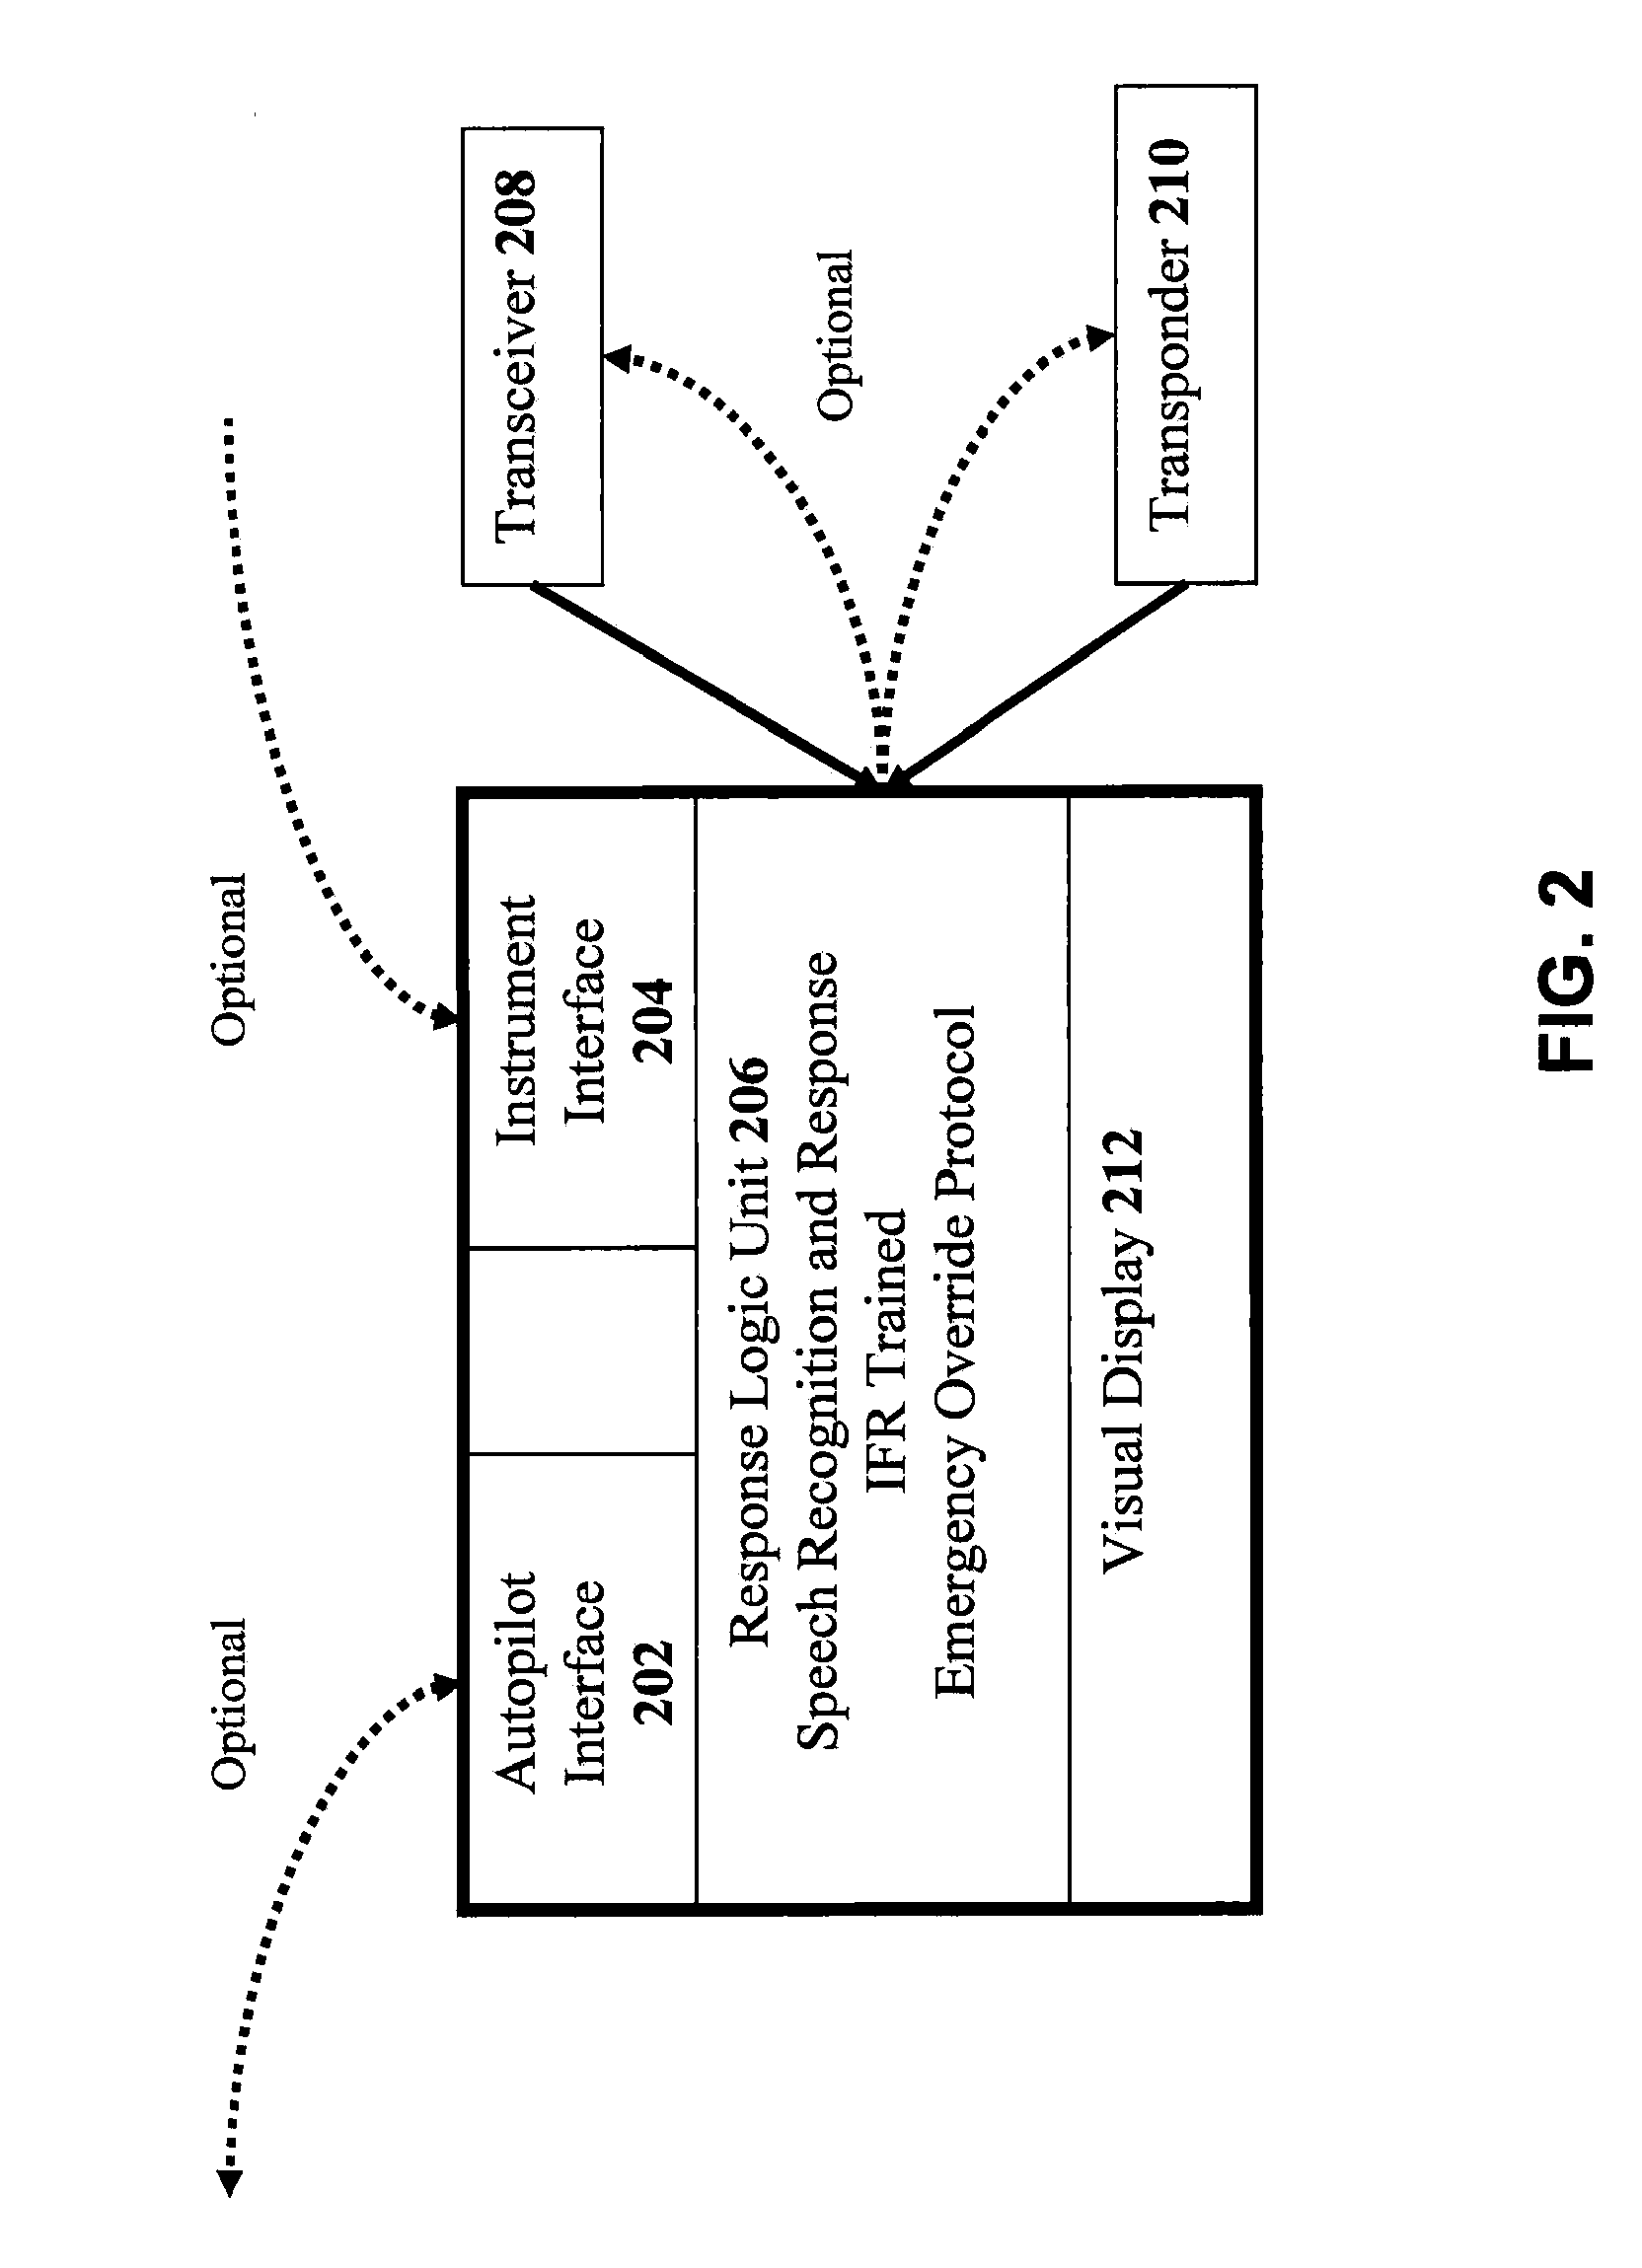 Method and system for controlling manned and unmanned aircraft using speech recognition tools